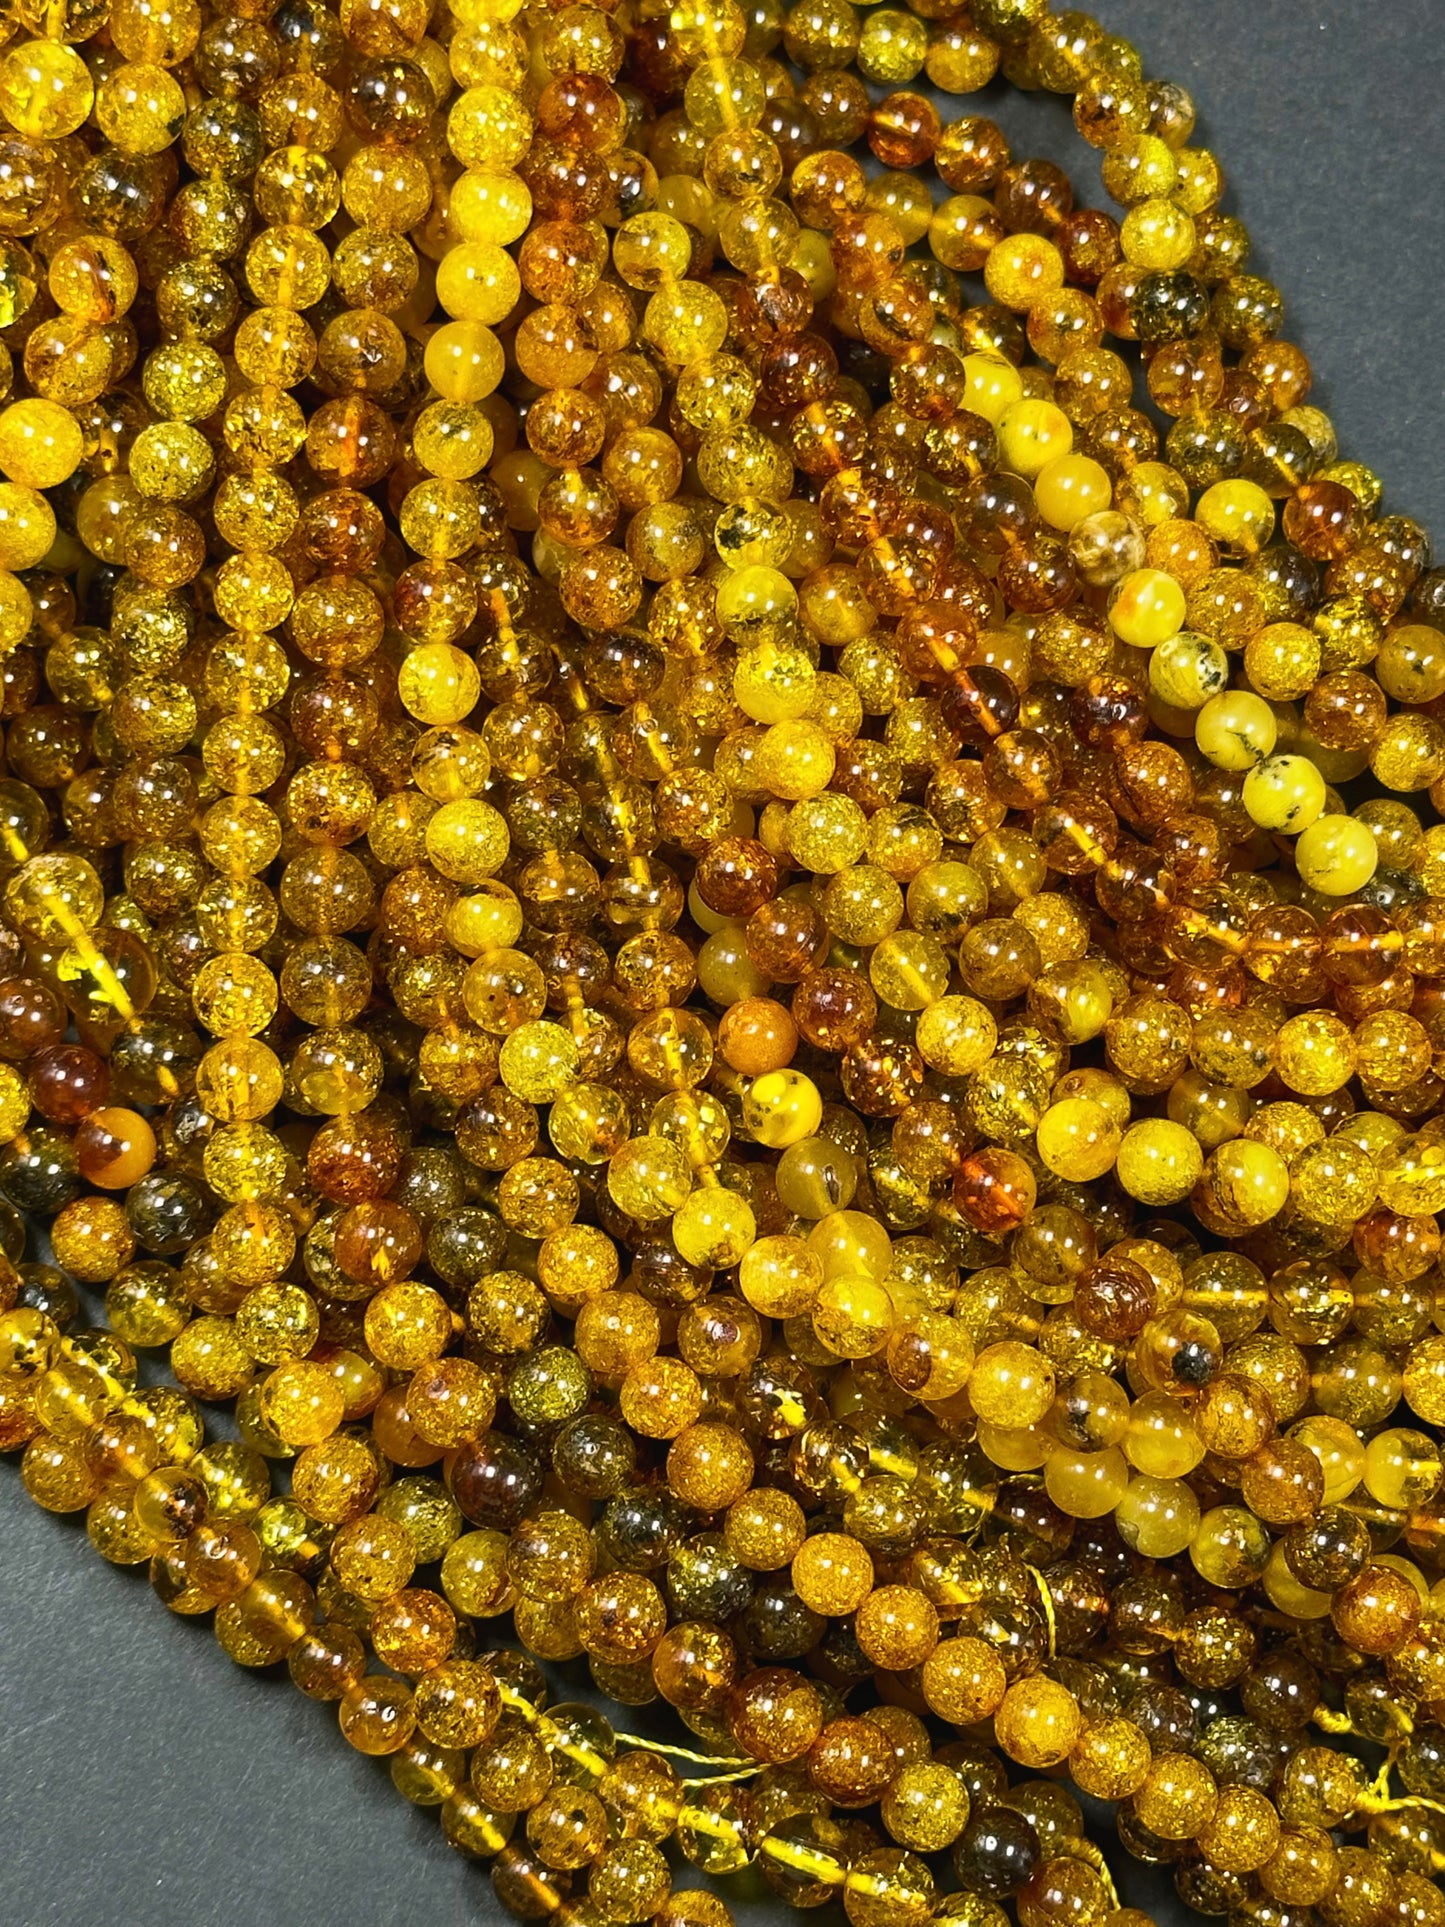 Natural Amber Baltic Gold Gemstone Bead 6mm Round Beads, Gorgeous Natural Amber Golden Orange-Yellow Color Beads, Excellent Quality Full Strand 15.5"